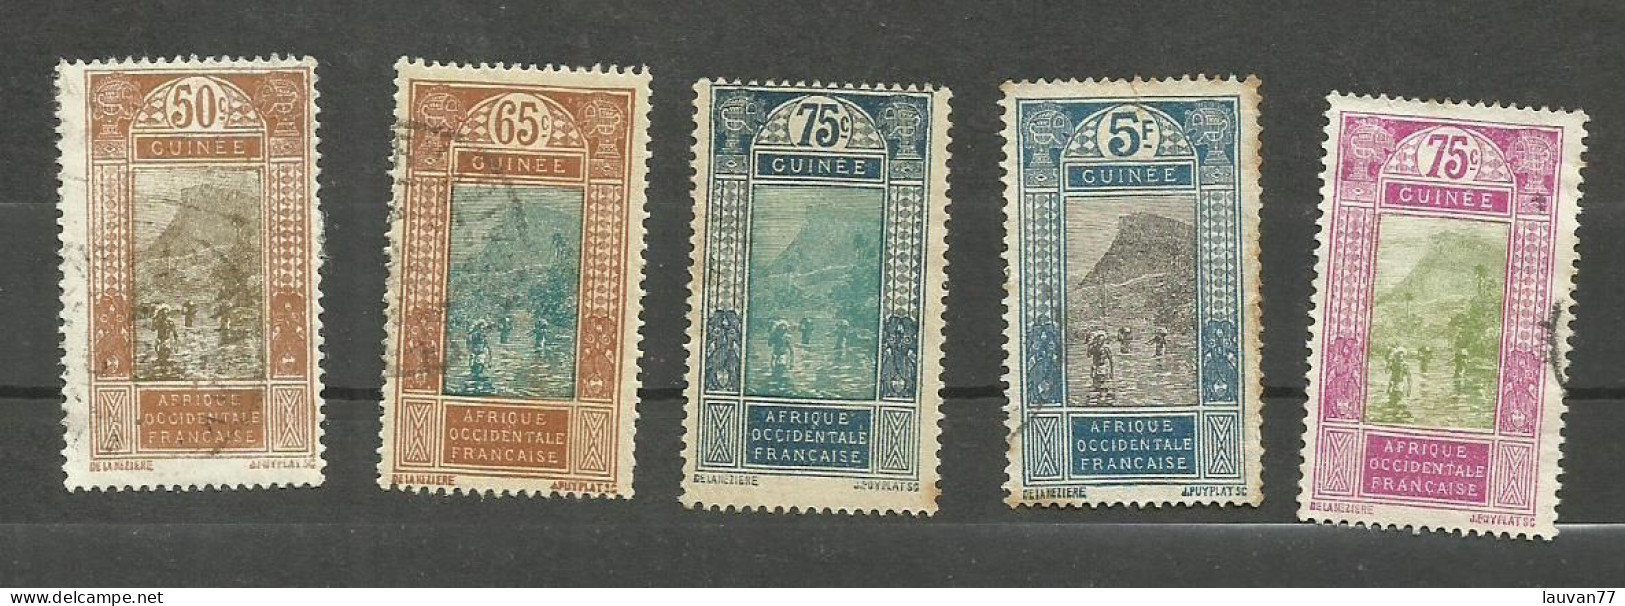 Guinée N°93, 95, 96, 98, 110 Cote 6.60€ - Used Stamps